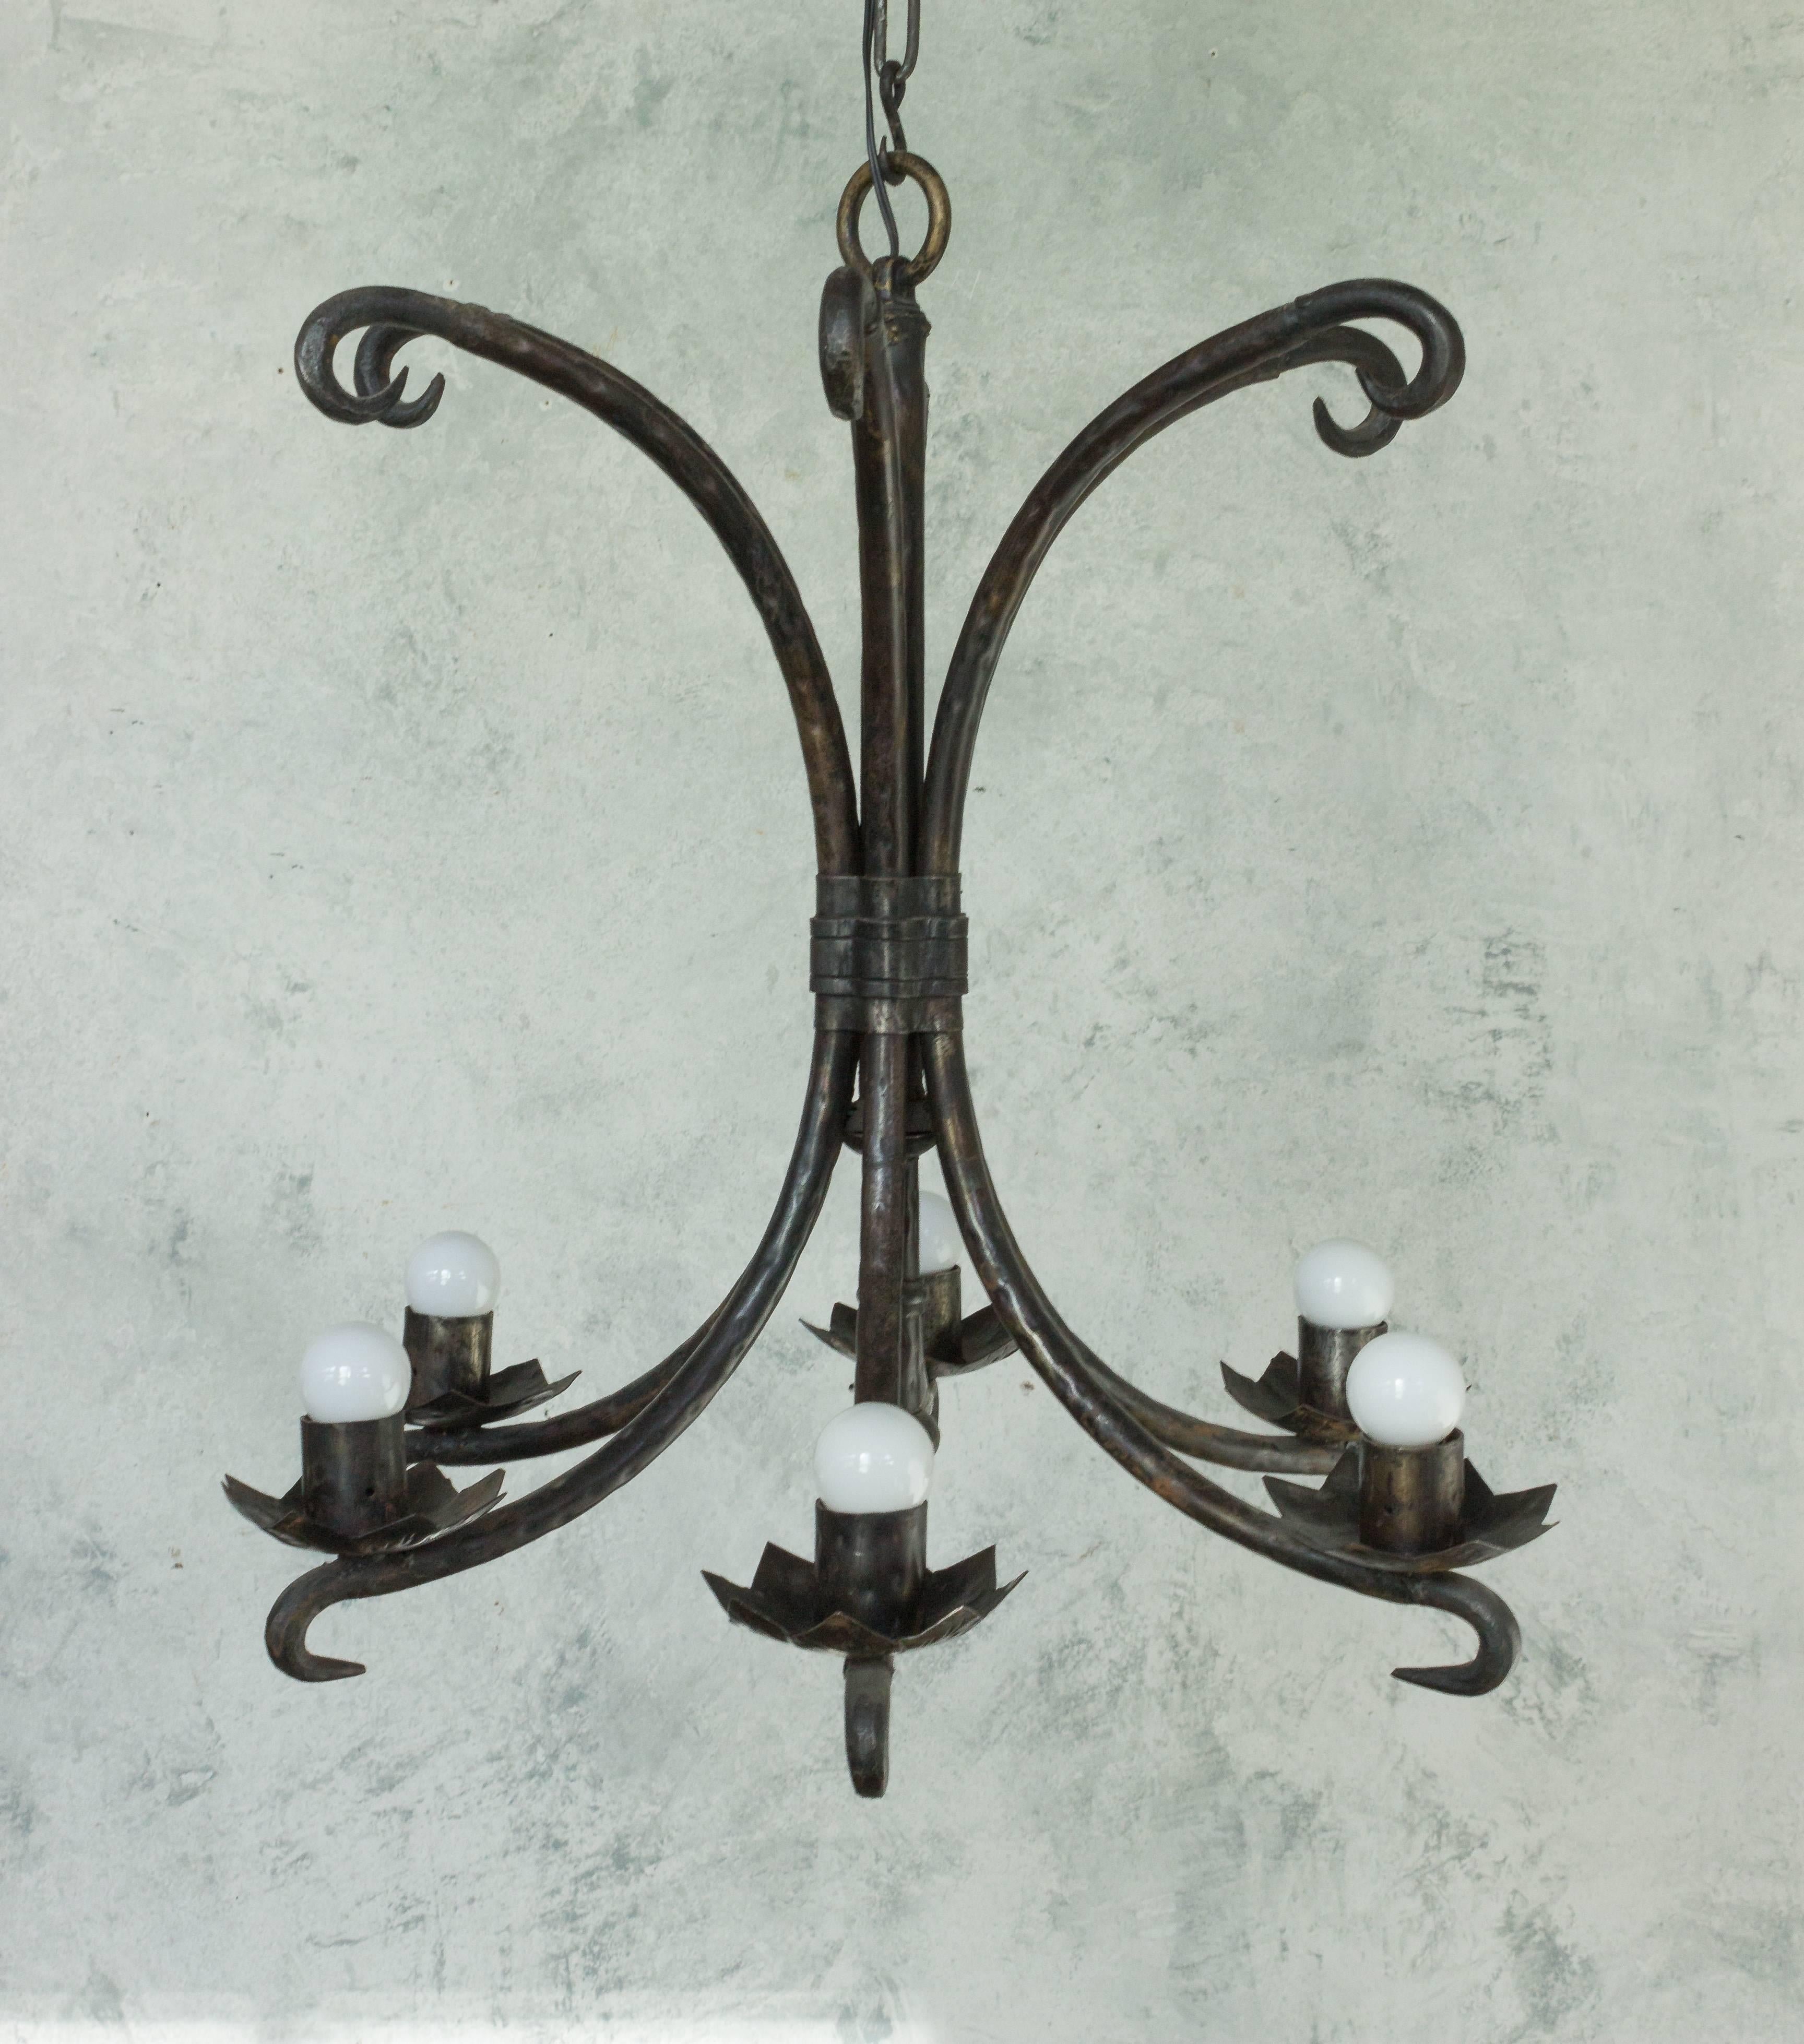 Spanish wrought iron chandelier with black waxed finish, six lights.

Ref #: LC0506-02

Dimensions: 30”H x 28”Diameter

SALE PRICE IS VALID UNTIL 01/18/2022. ( SALE PRICE IS FINAL NET PRICE )